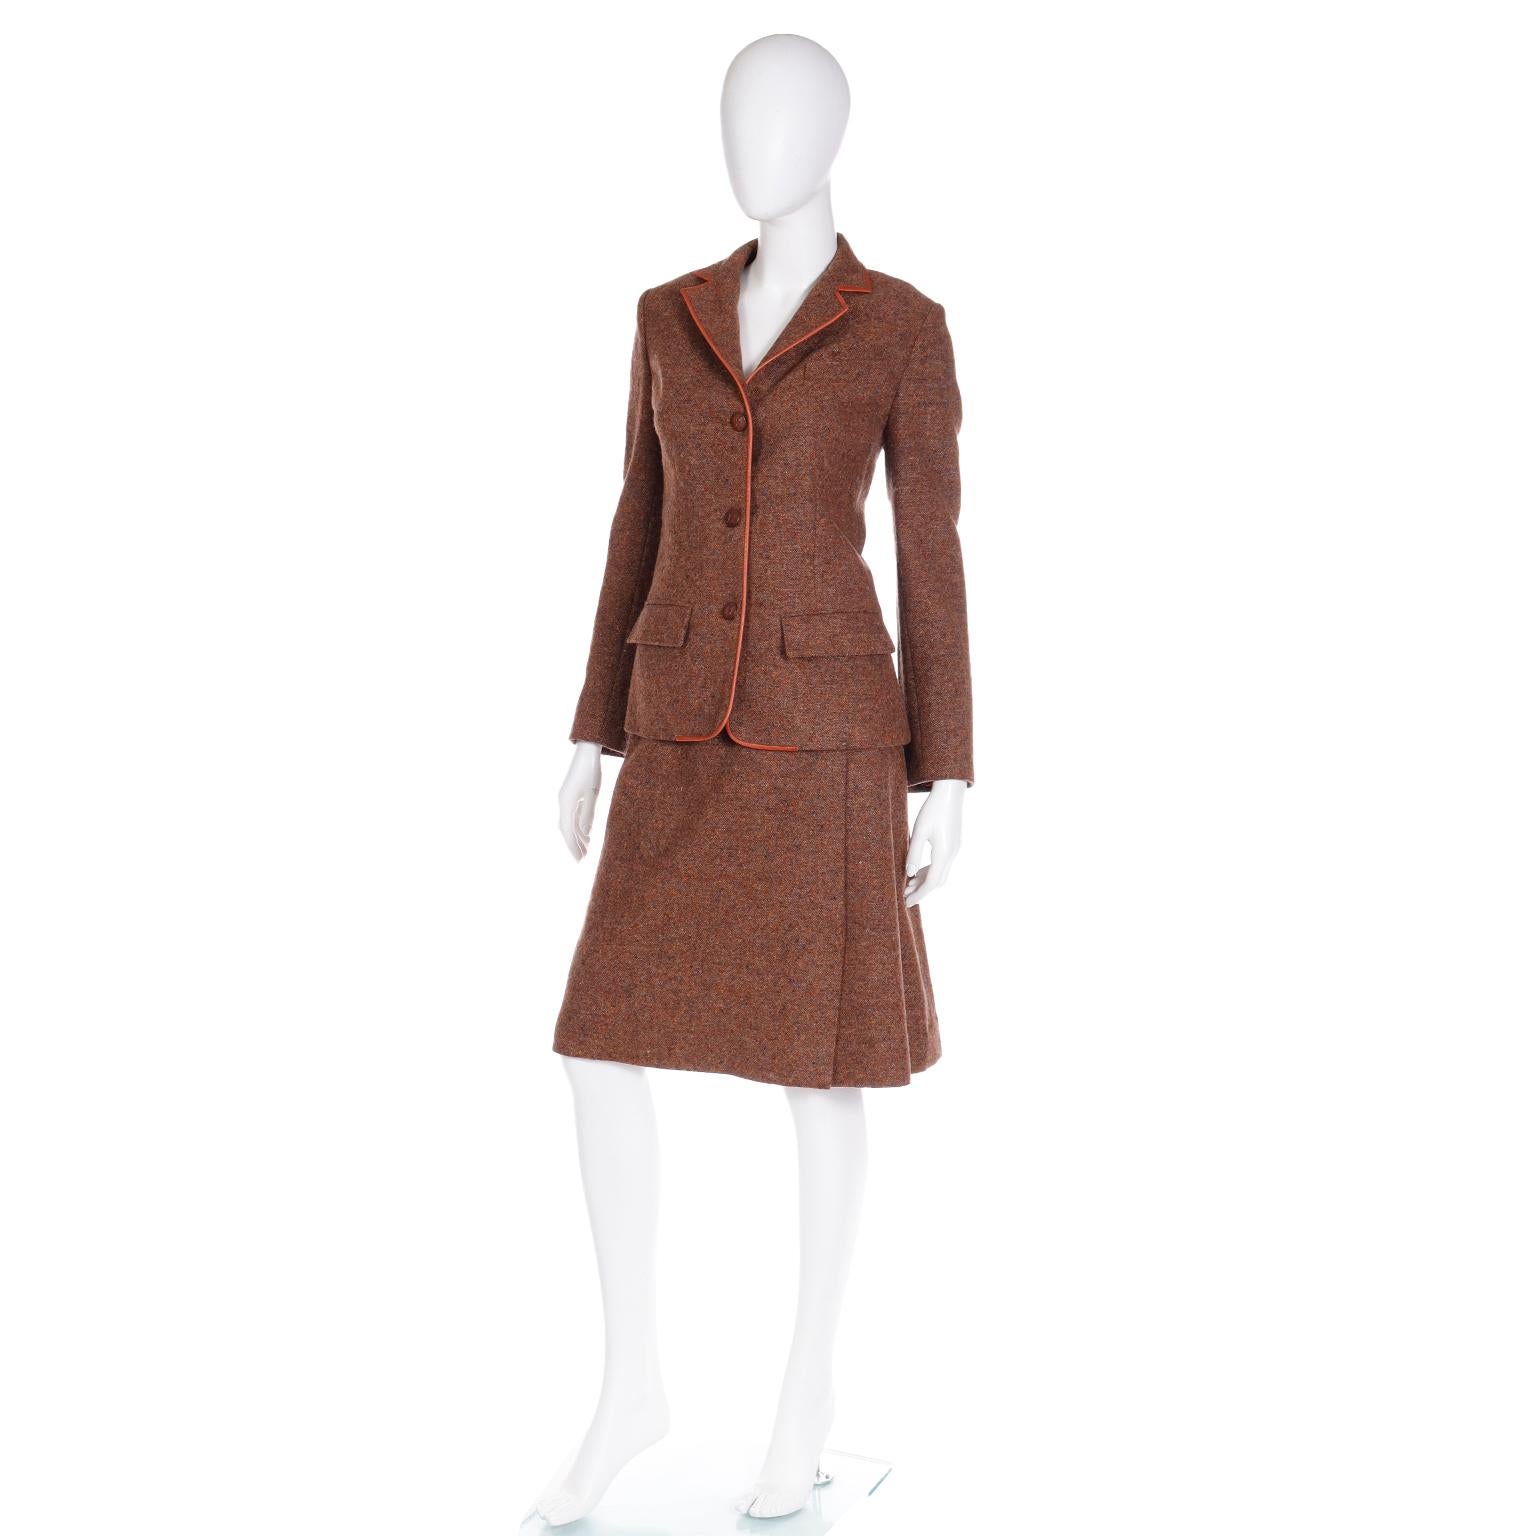 Hermes Vintage 1970s 2pc Jacket & Skirt Suit in Brown Tweed With Leather Trim In Excellent Condition For Sale In Portland, OR